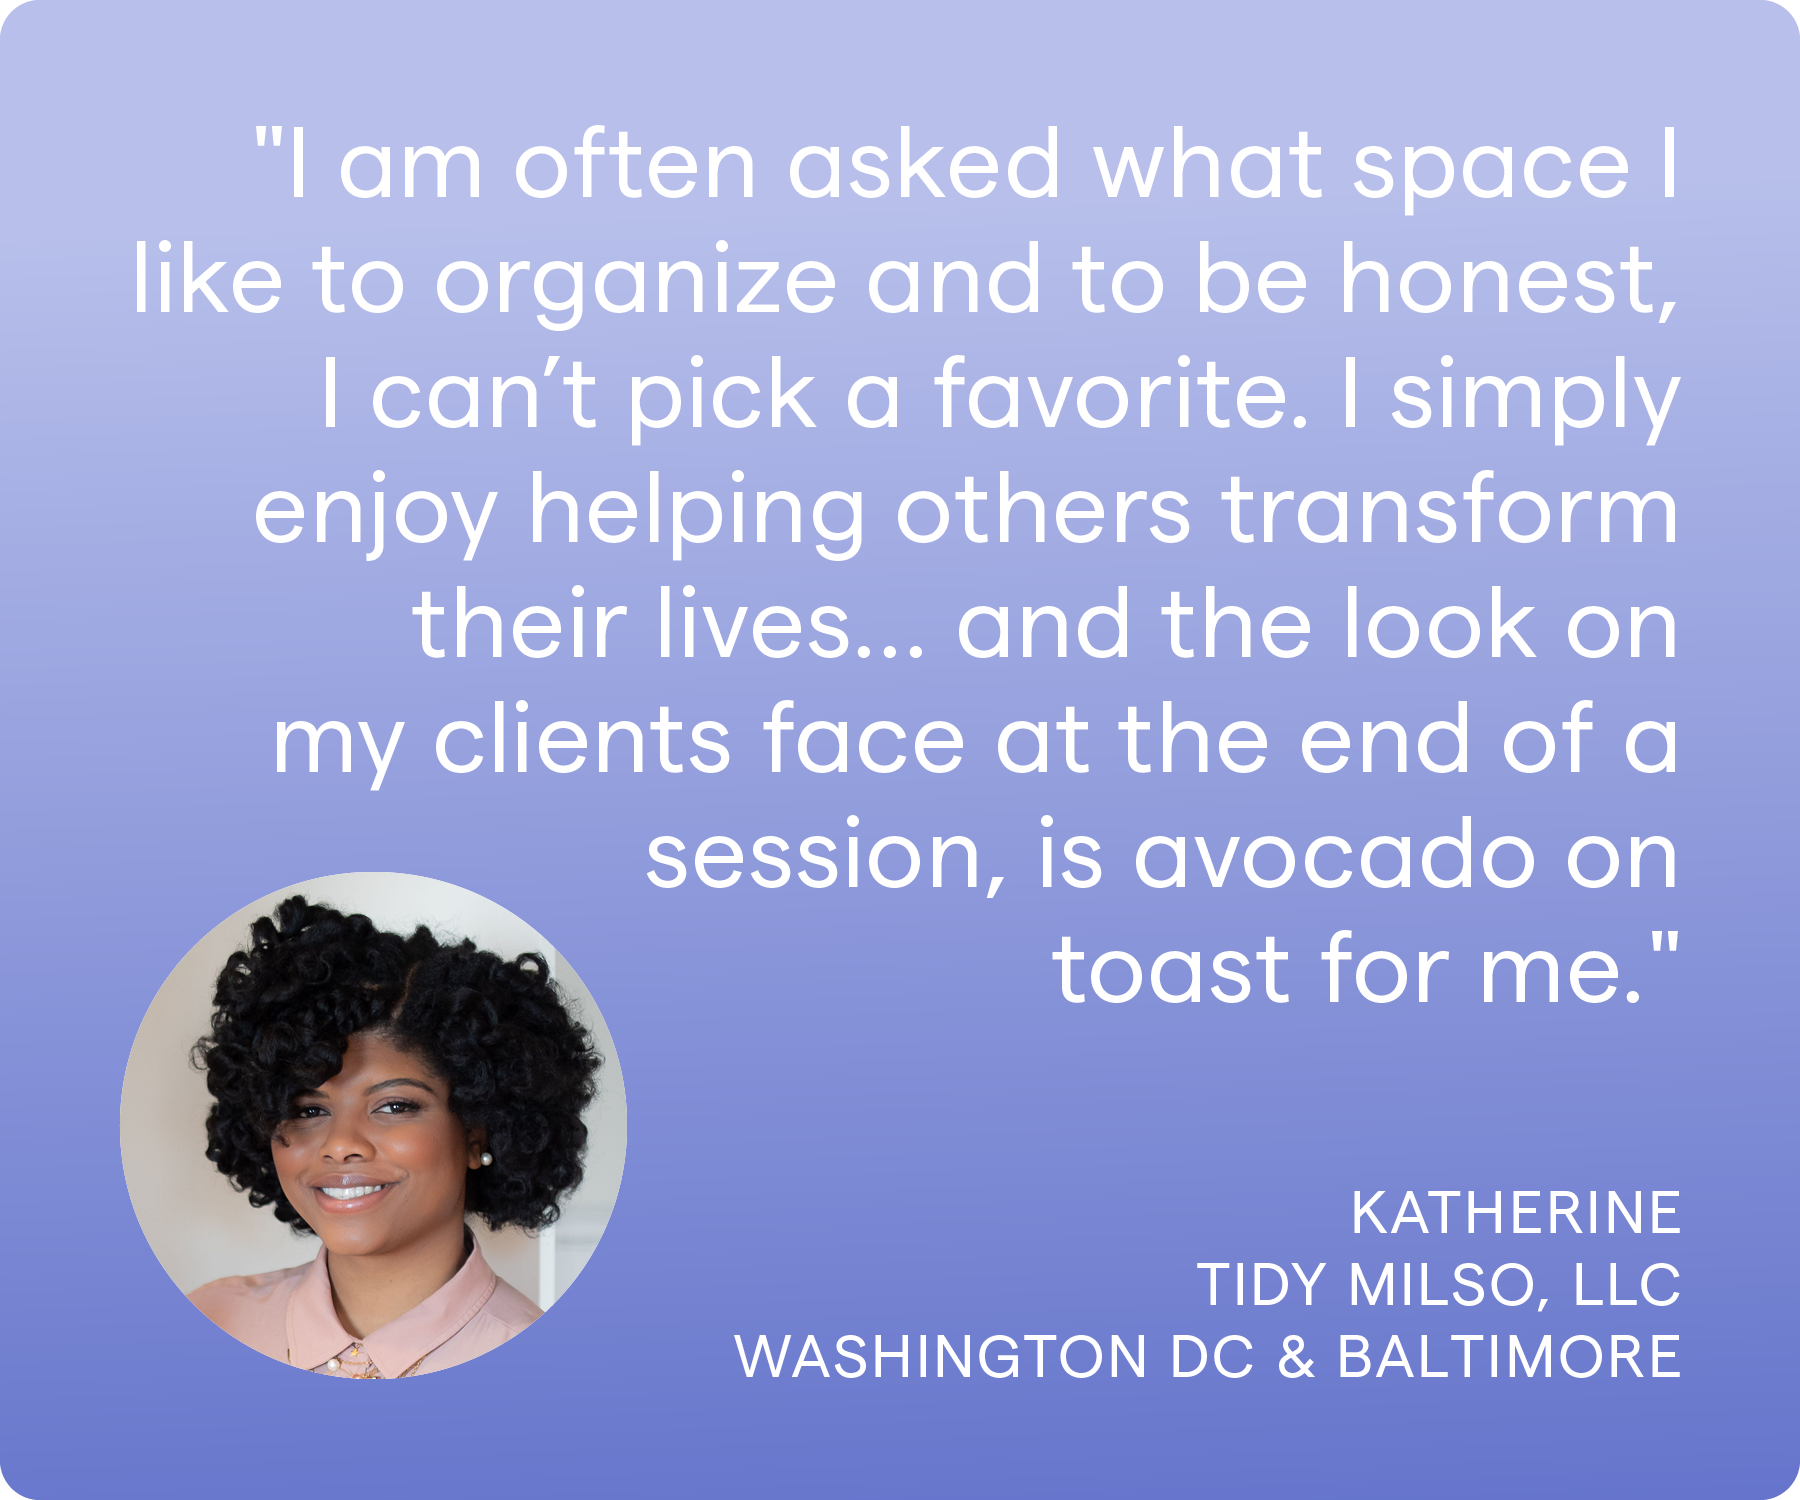 'I am often asked what space I like to organize and to be honest, I can’t pick a favorite. I simply enjoy helping others transform their lives… and the look on my clients face at the end of a session, is avocado on toast for me.' Katherine, Tidy Milso LLC, Washington DC and Baltimore